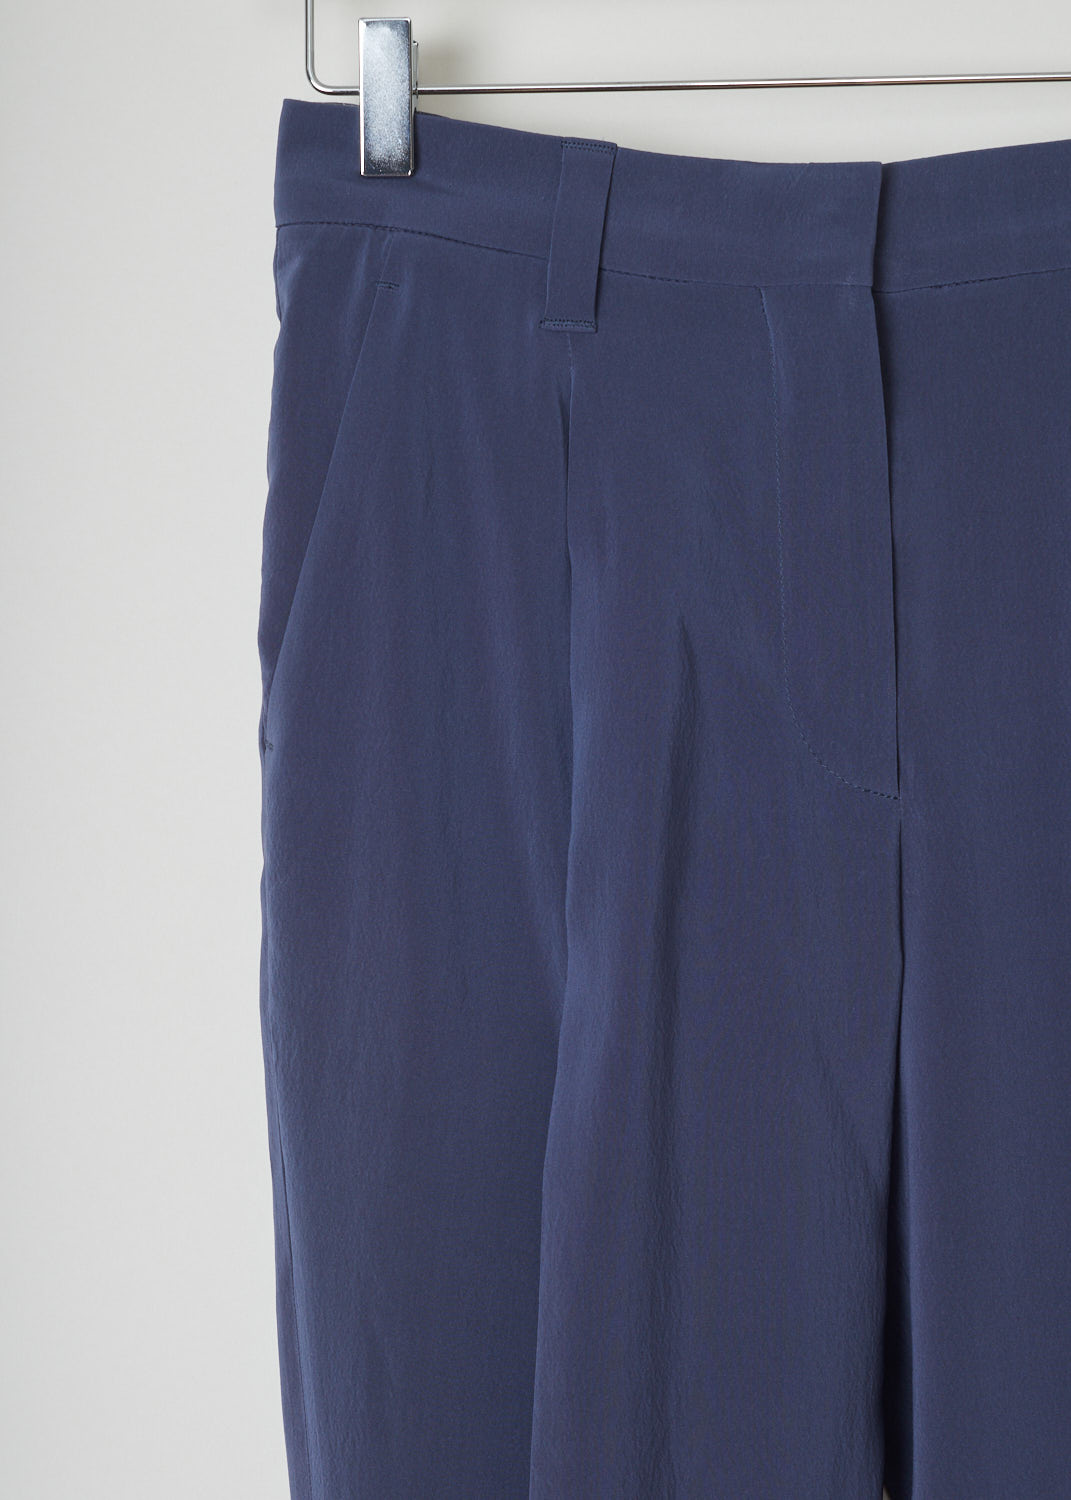 Brunello Cucinelli, Blue silk pants, M0F51P1362_C2435, blue, detail, Blue pants with a slight shine to it. Featuring a single pleat and forward slanted pockets. As your closure option this model has a zipper with a metal hook and a backing button. The cropped length with the rolled up hems just adds style to these pants. On the backside you will find two welt pockets.